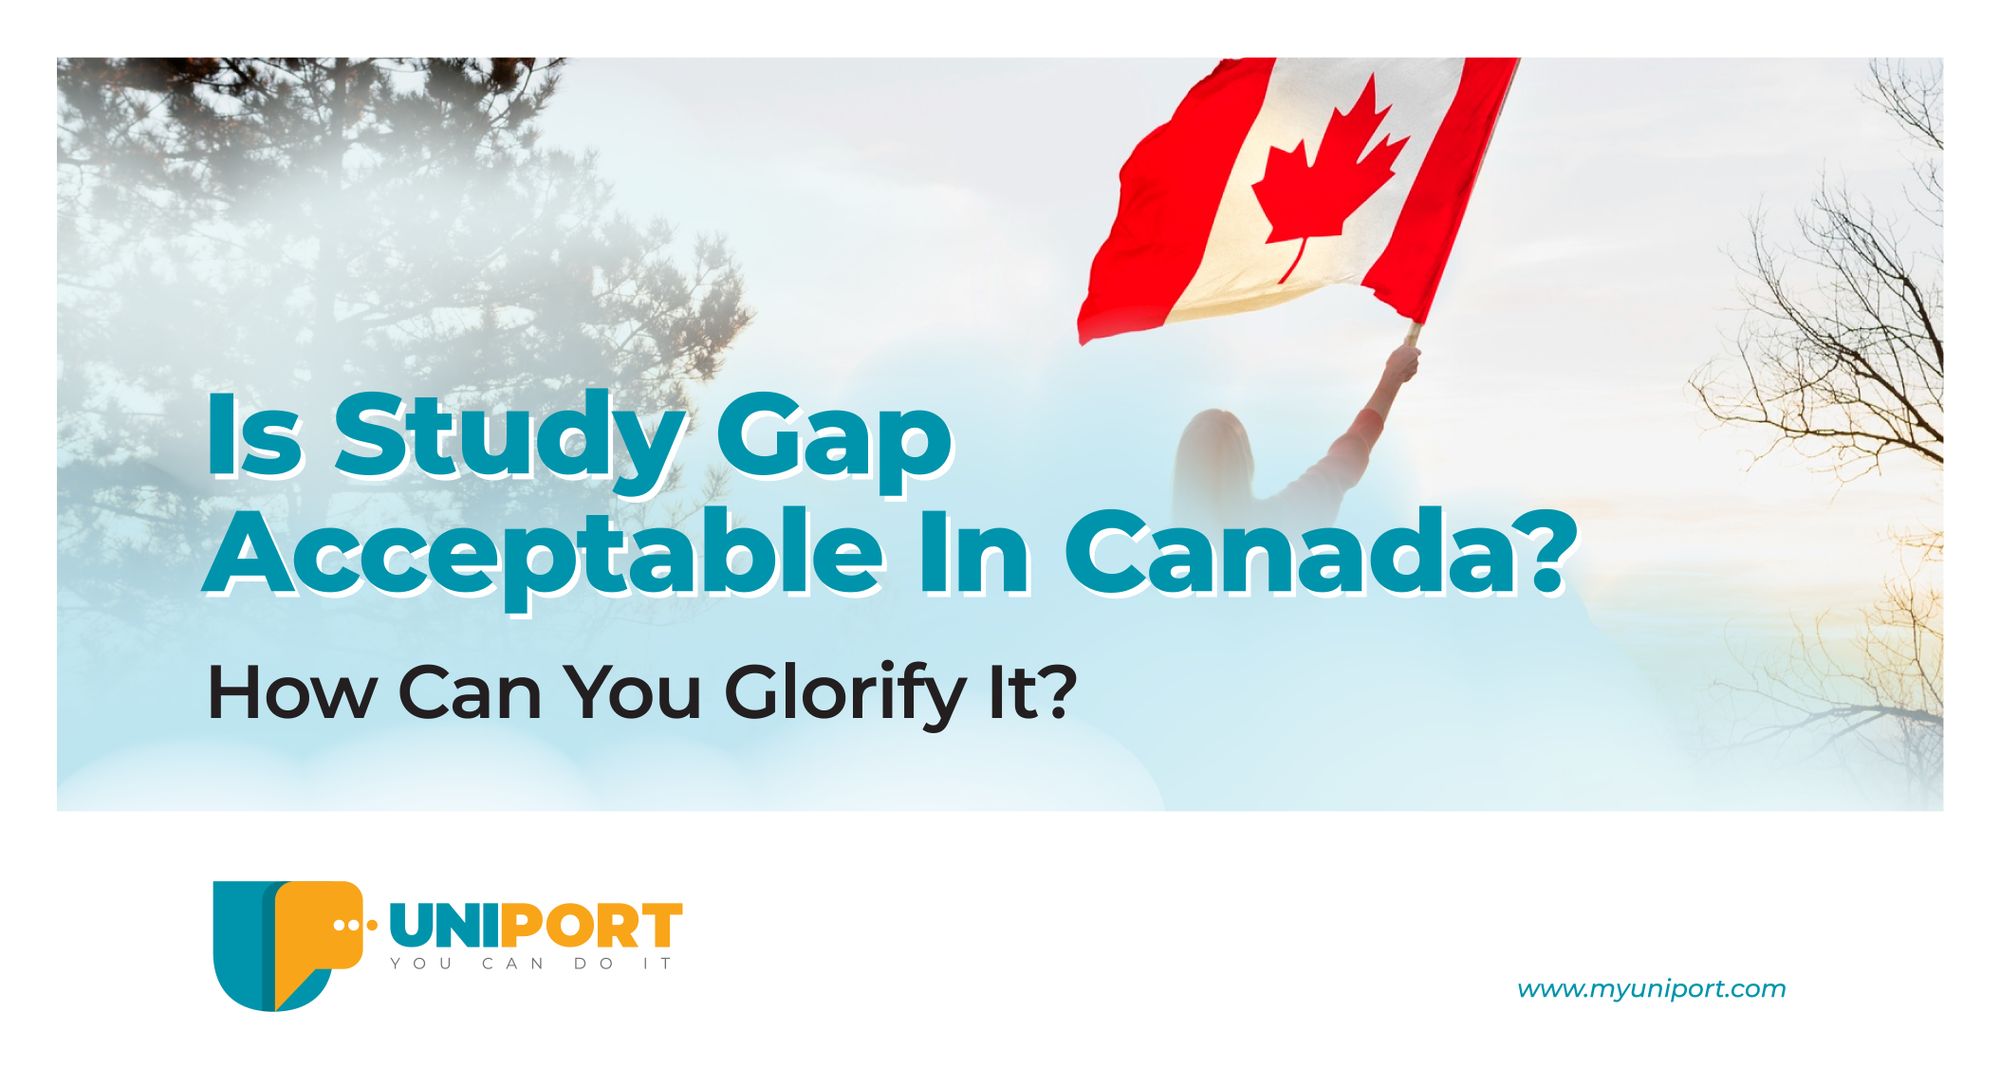 Is Study Gap Acceptable In Canada? How Can You Glorify It?